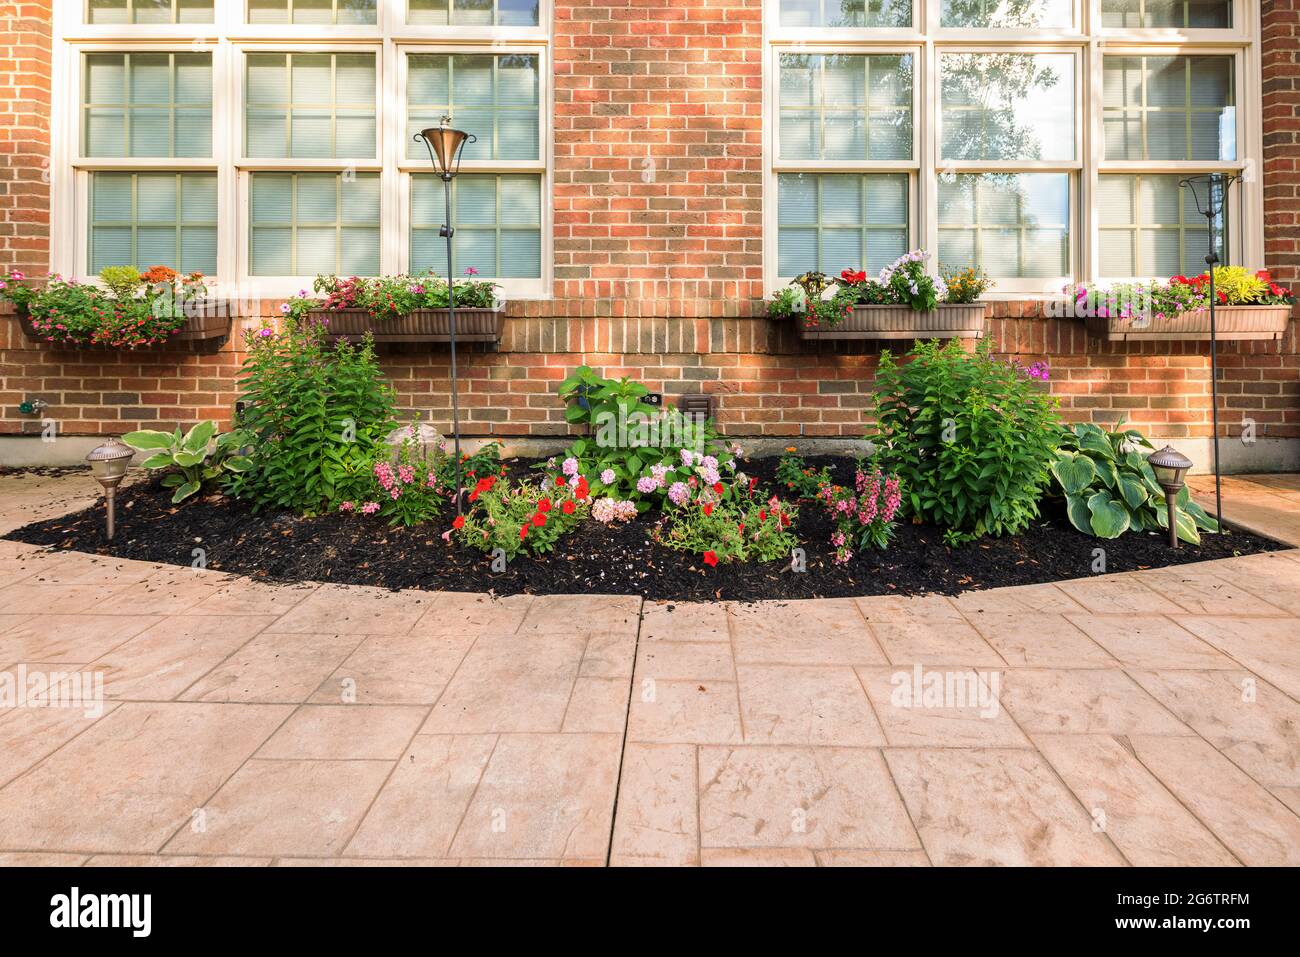 Backyard Flower Bed and Window Flower Boxes in Summer Stock Photo